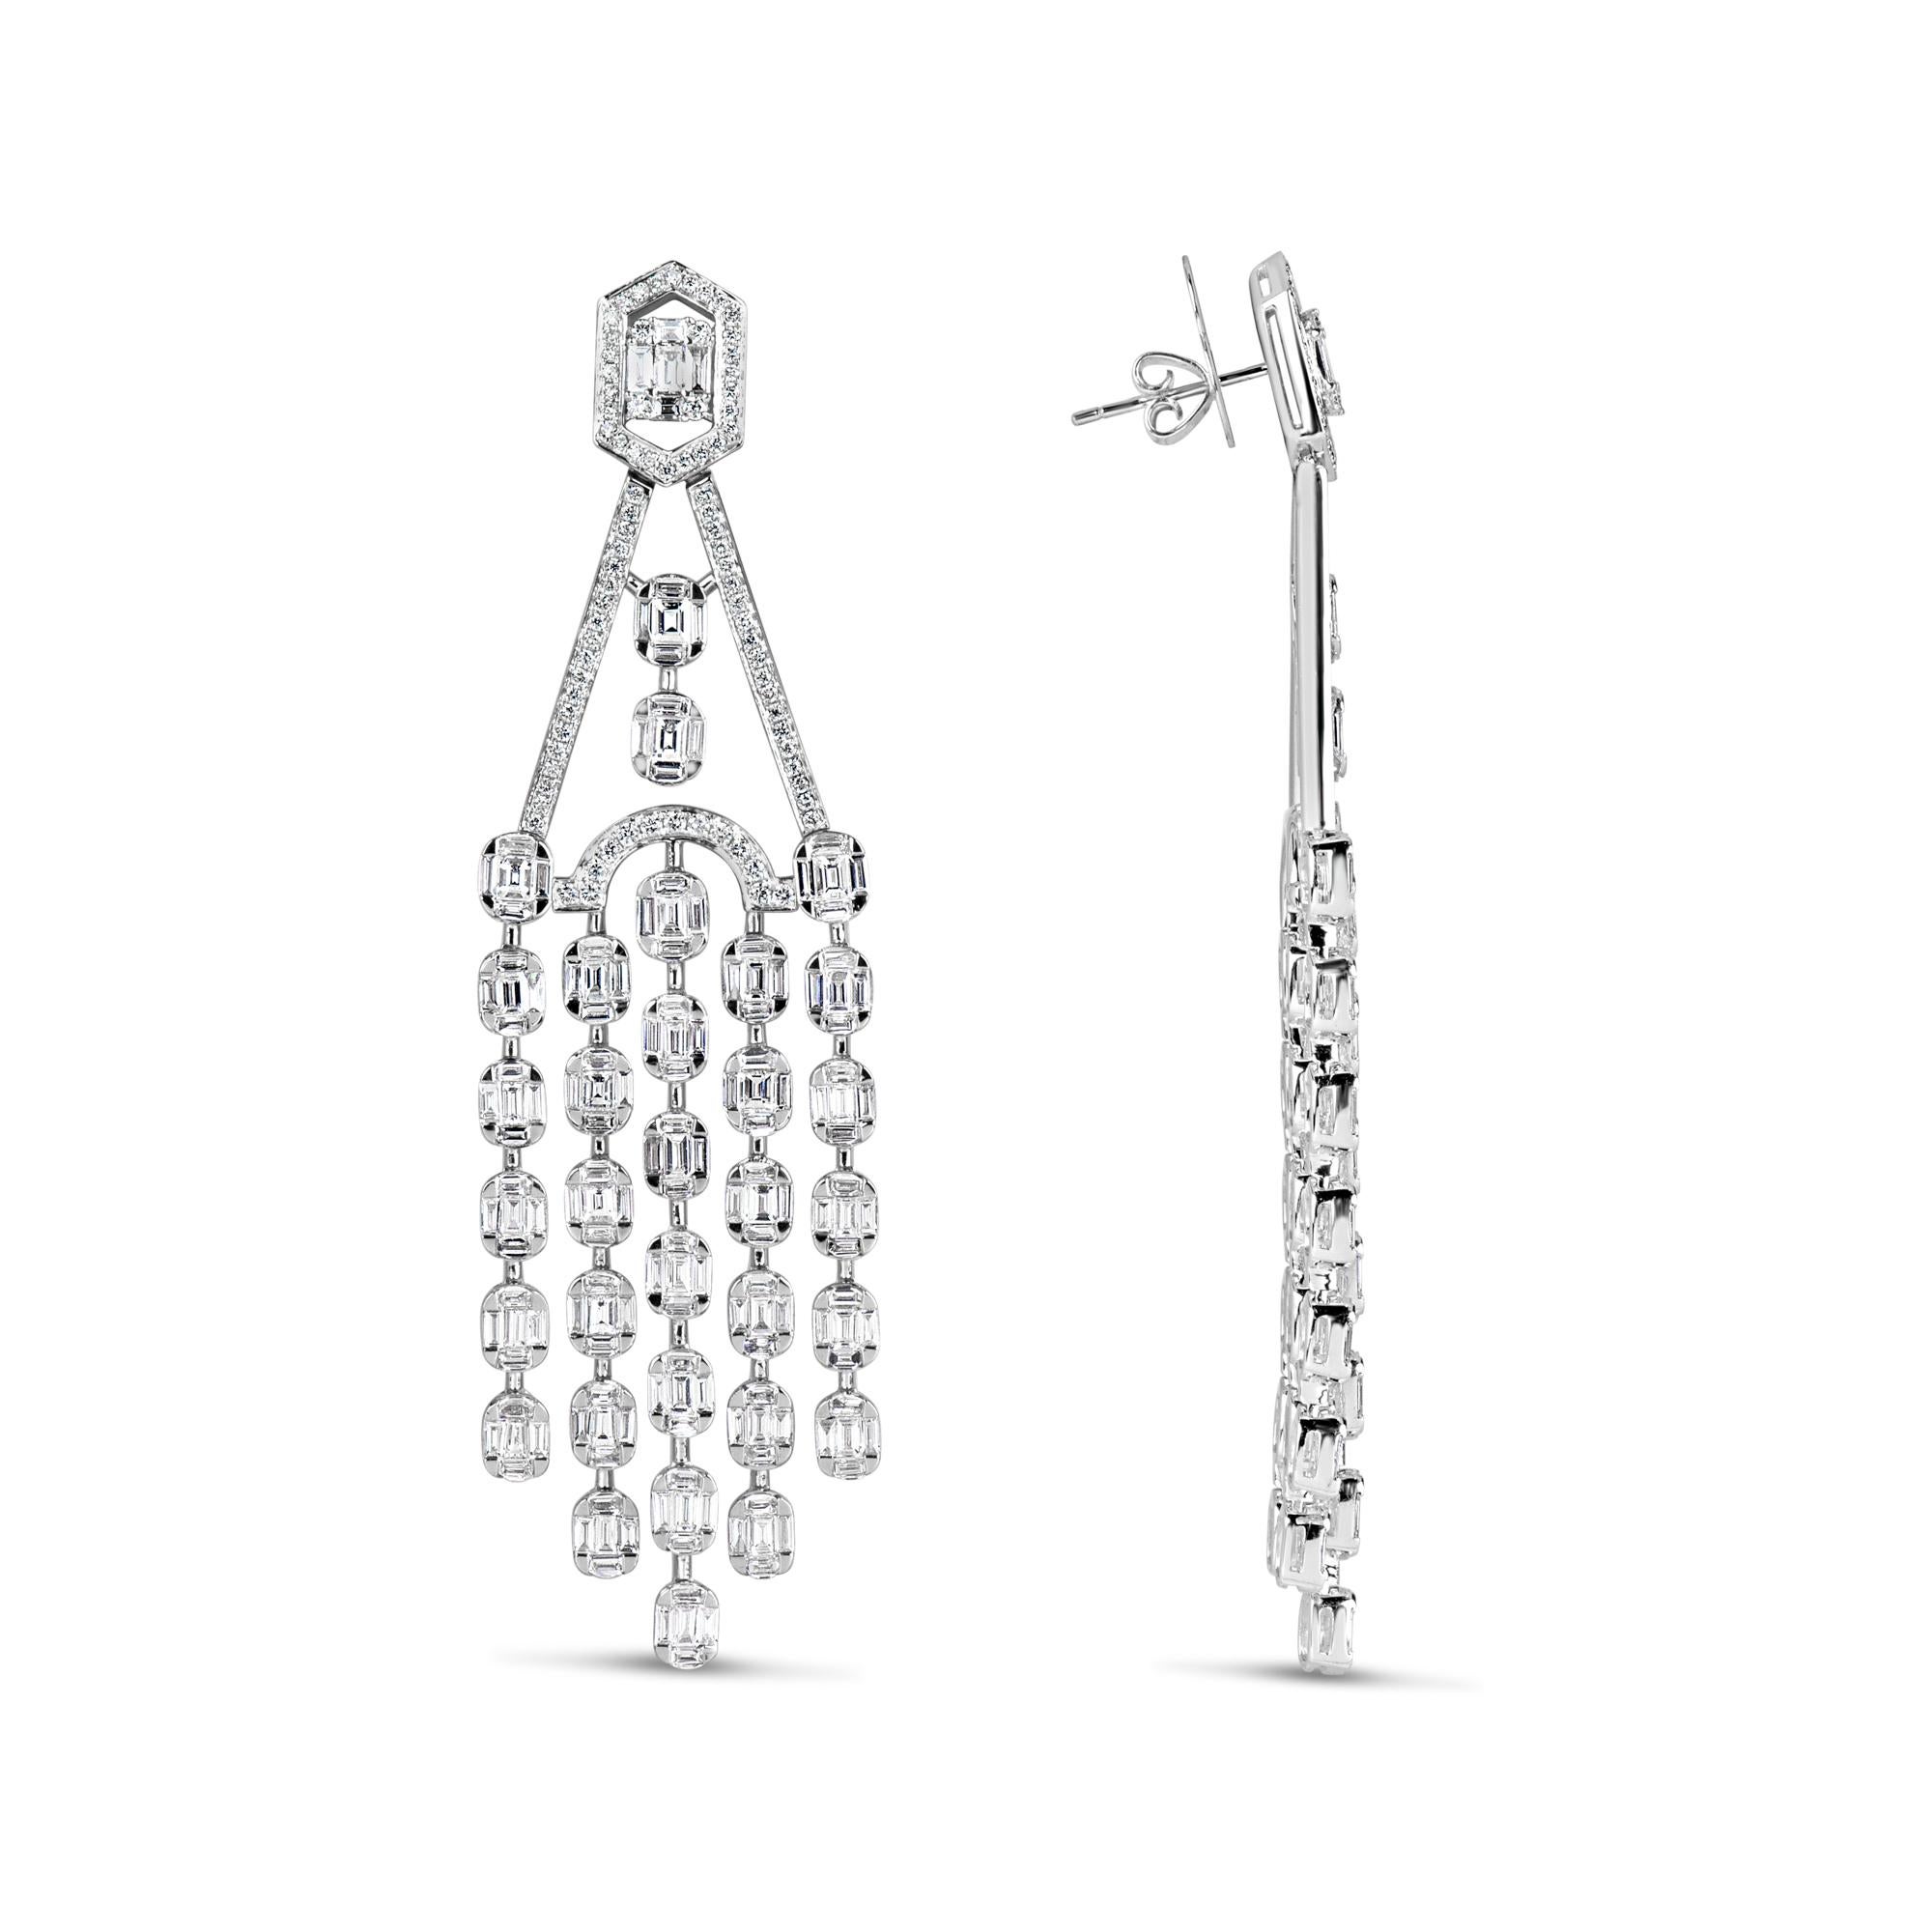 
The Following Items we are offering is a Rare Important Radiant 18KT Gold Glamorous and Elaborate Rare Magnificent Glittering White Diamond Chandelier Earrings. Earrings feature Rare Sparkling White Diamonds set in 18KT Gold!! T.C.W. Approx